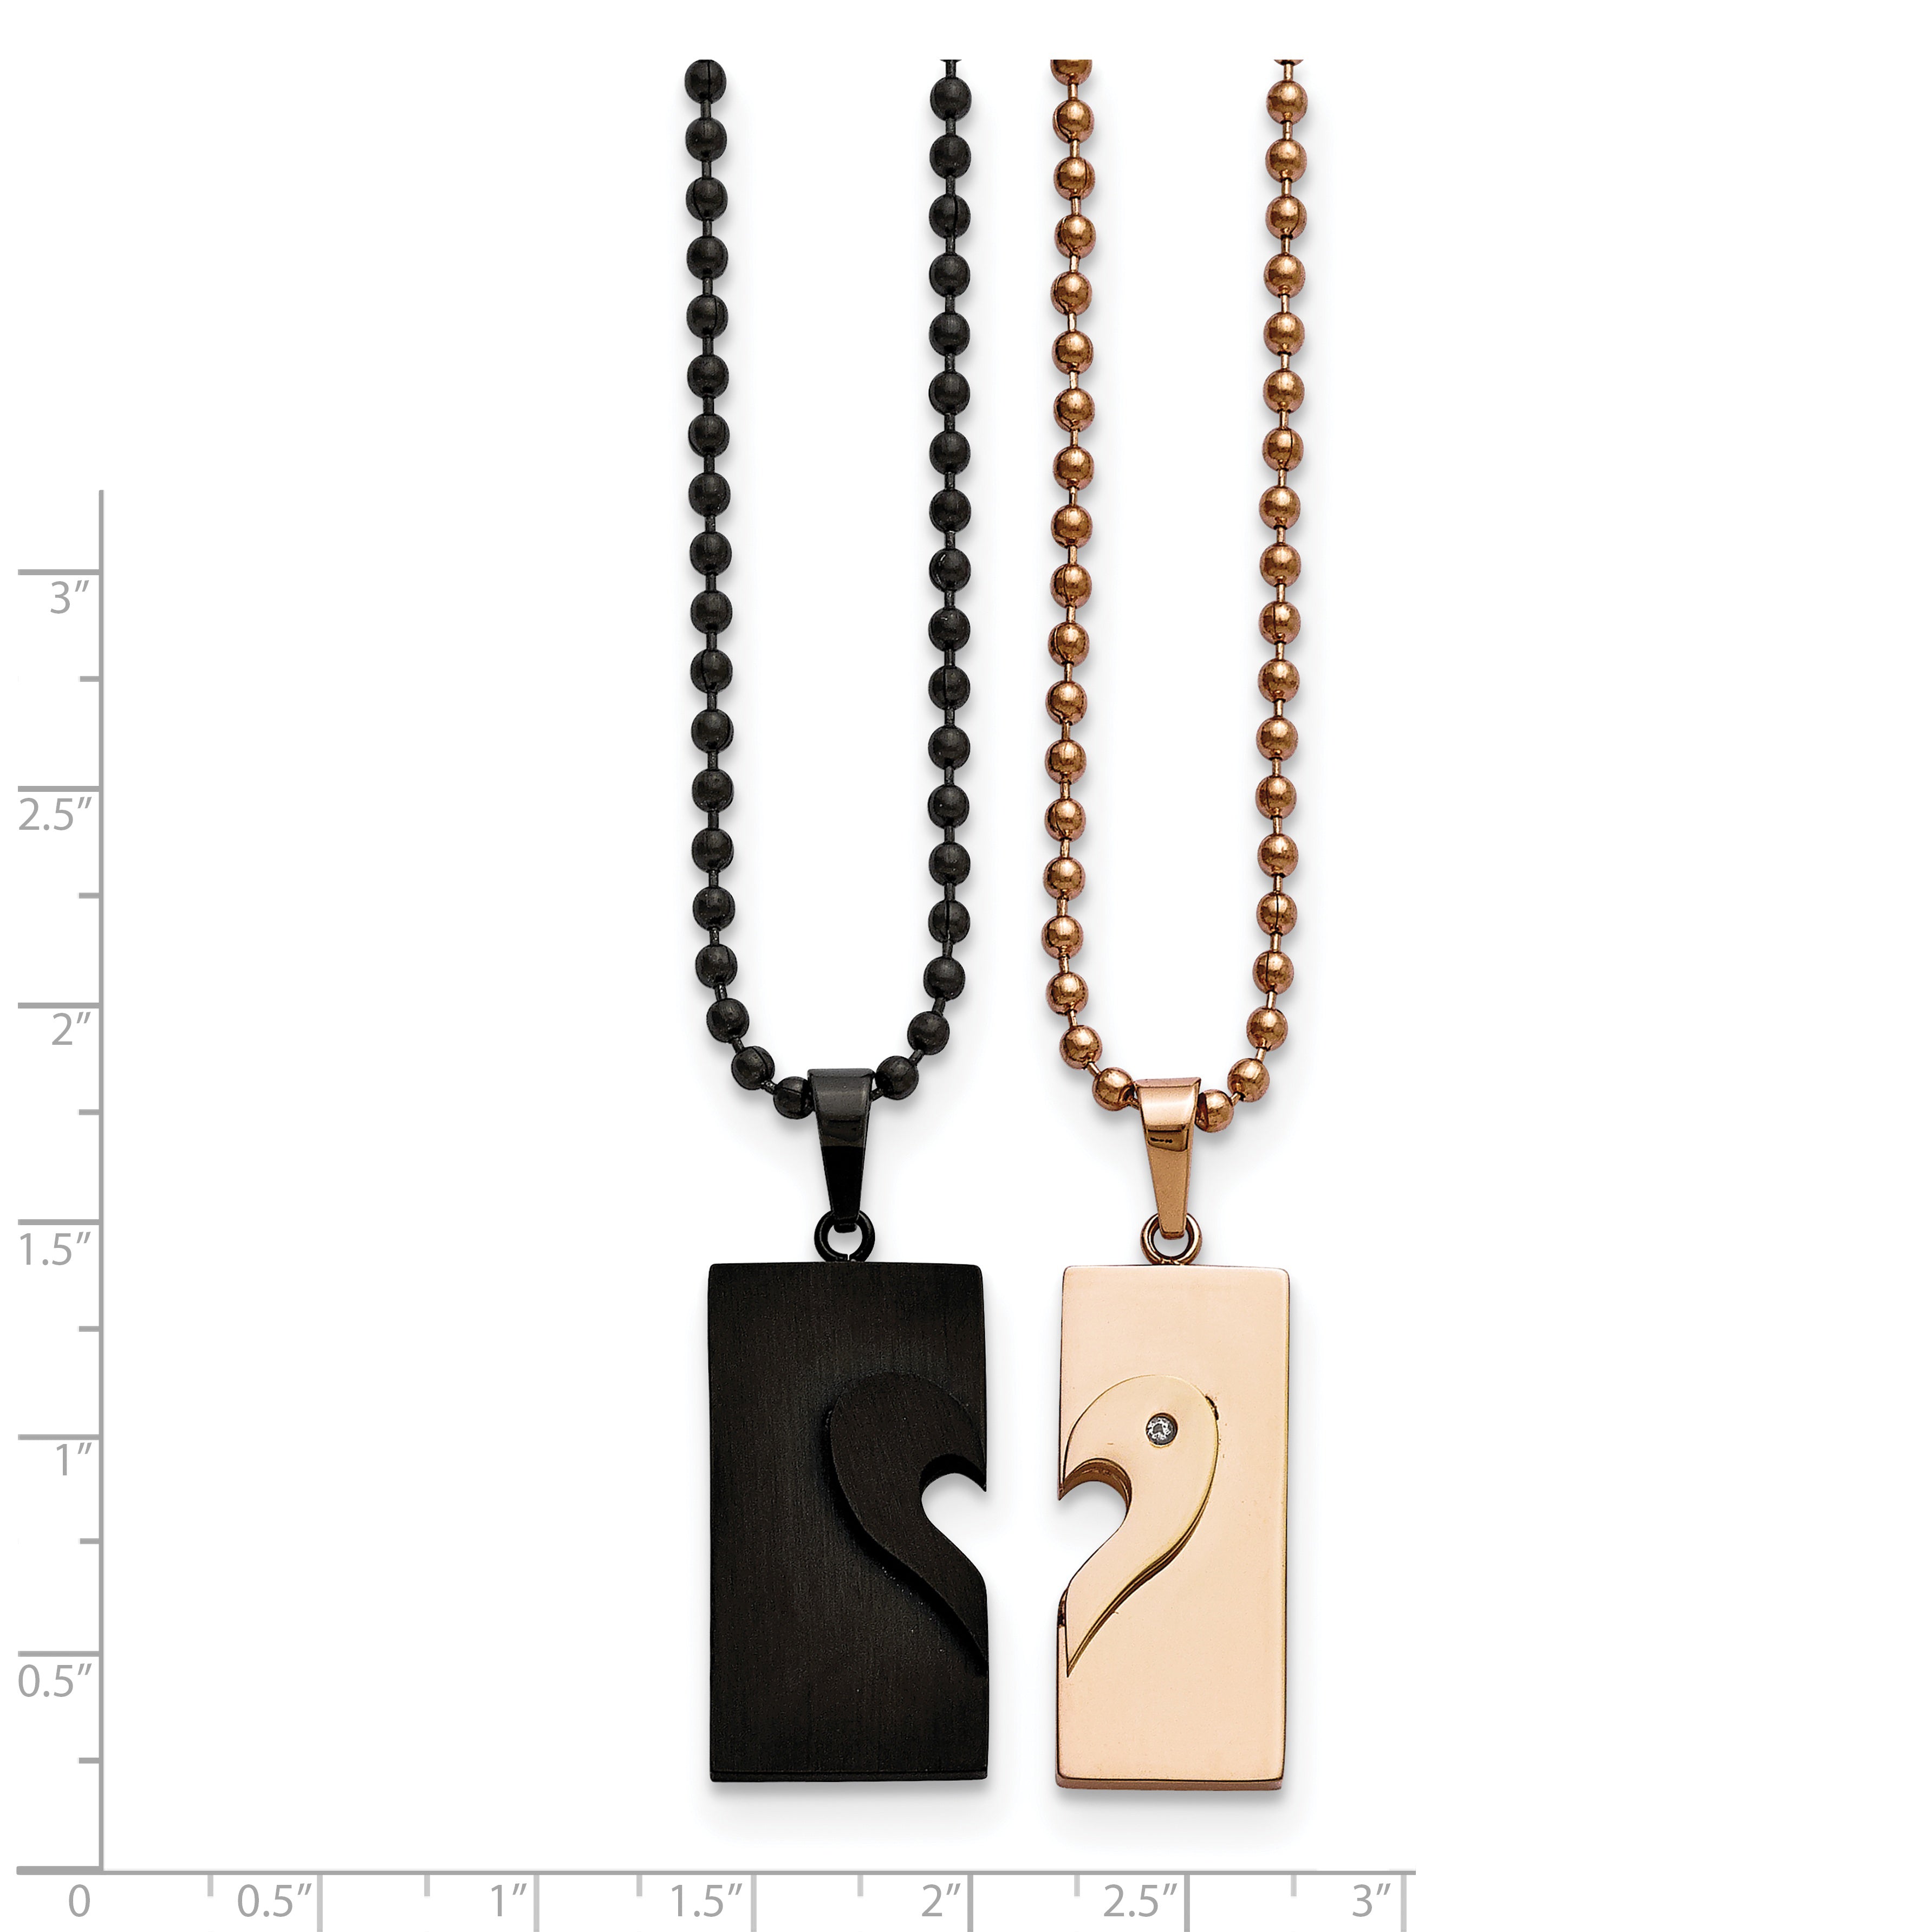 Chisel Stainless Steel Polished Black and Rose IP-plated Heart Pendants on 22 inch Ball Chain Necklace Set